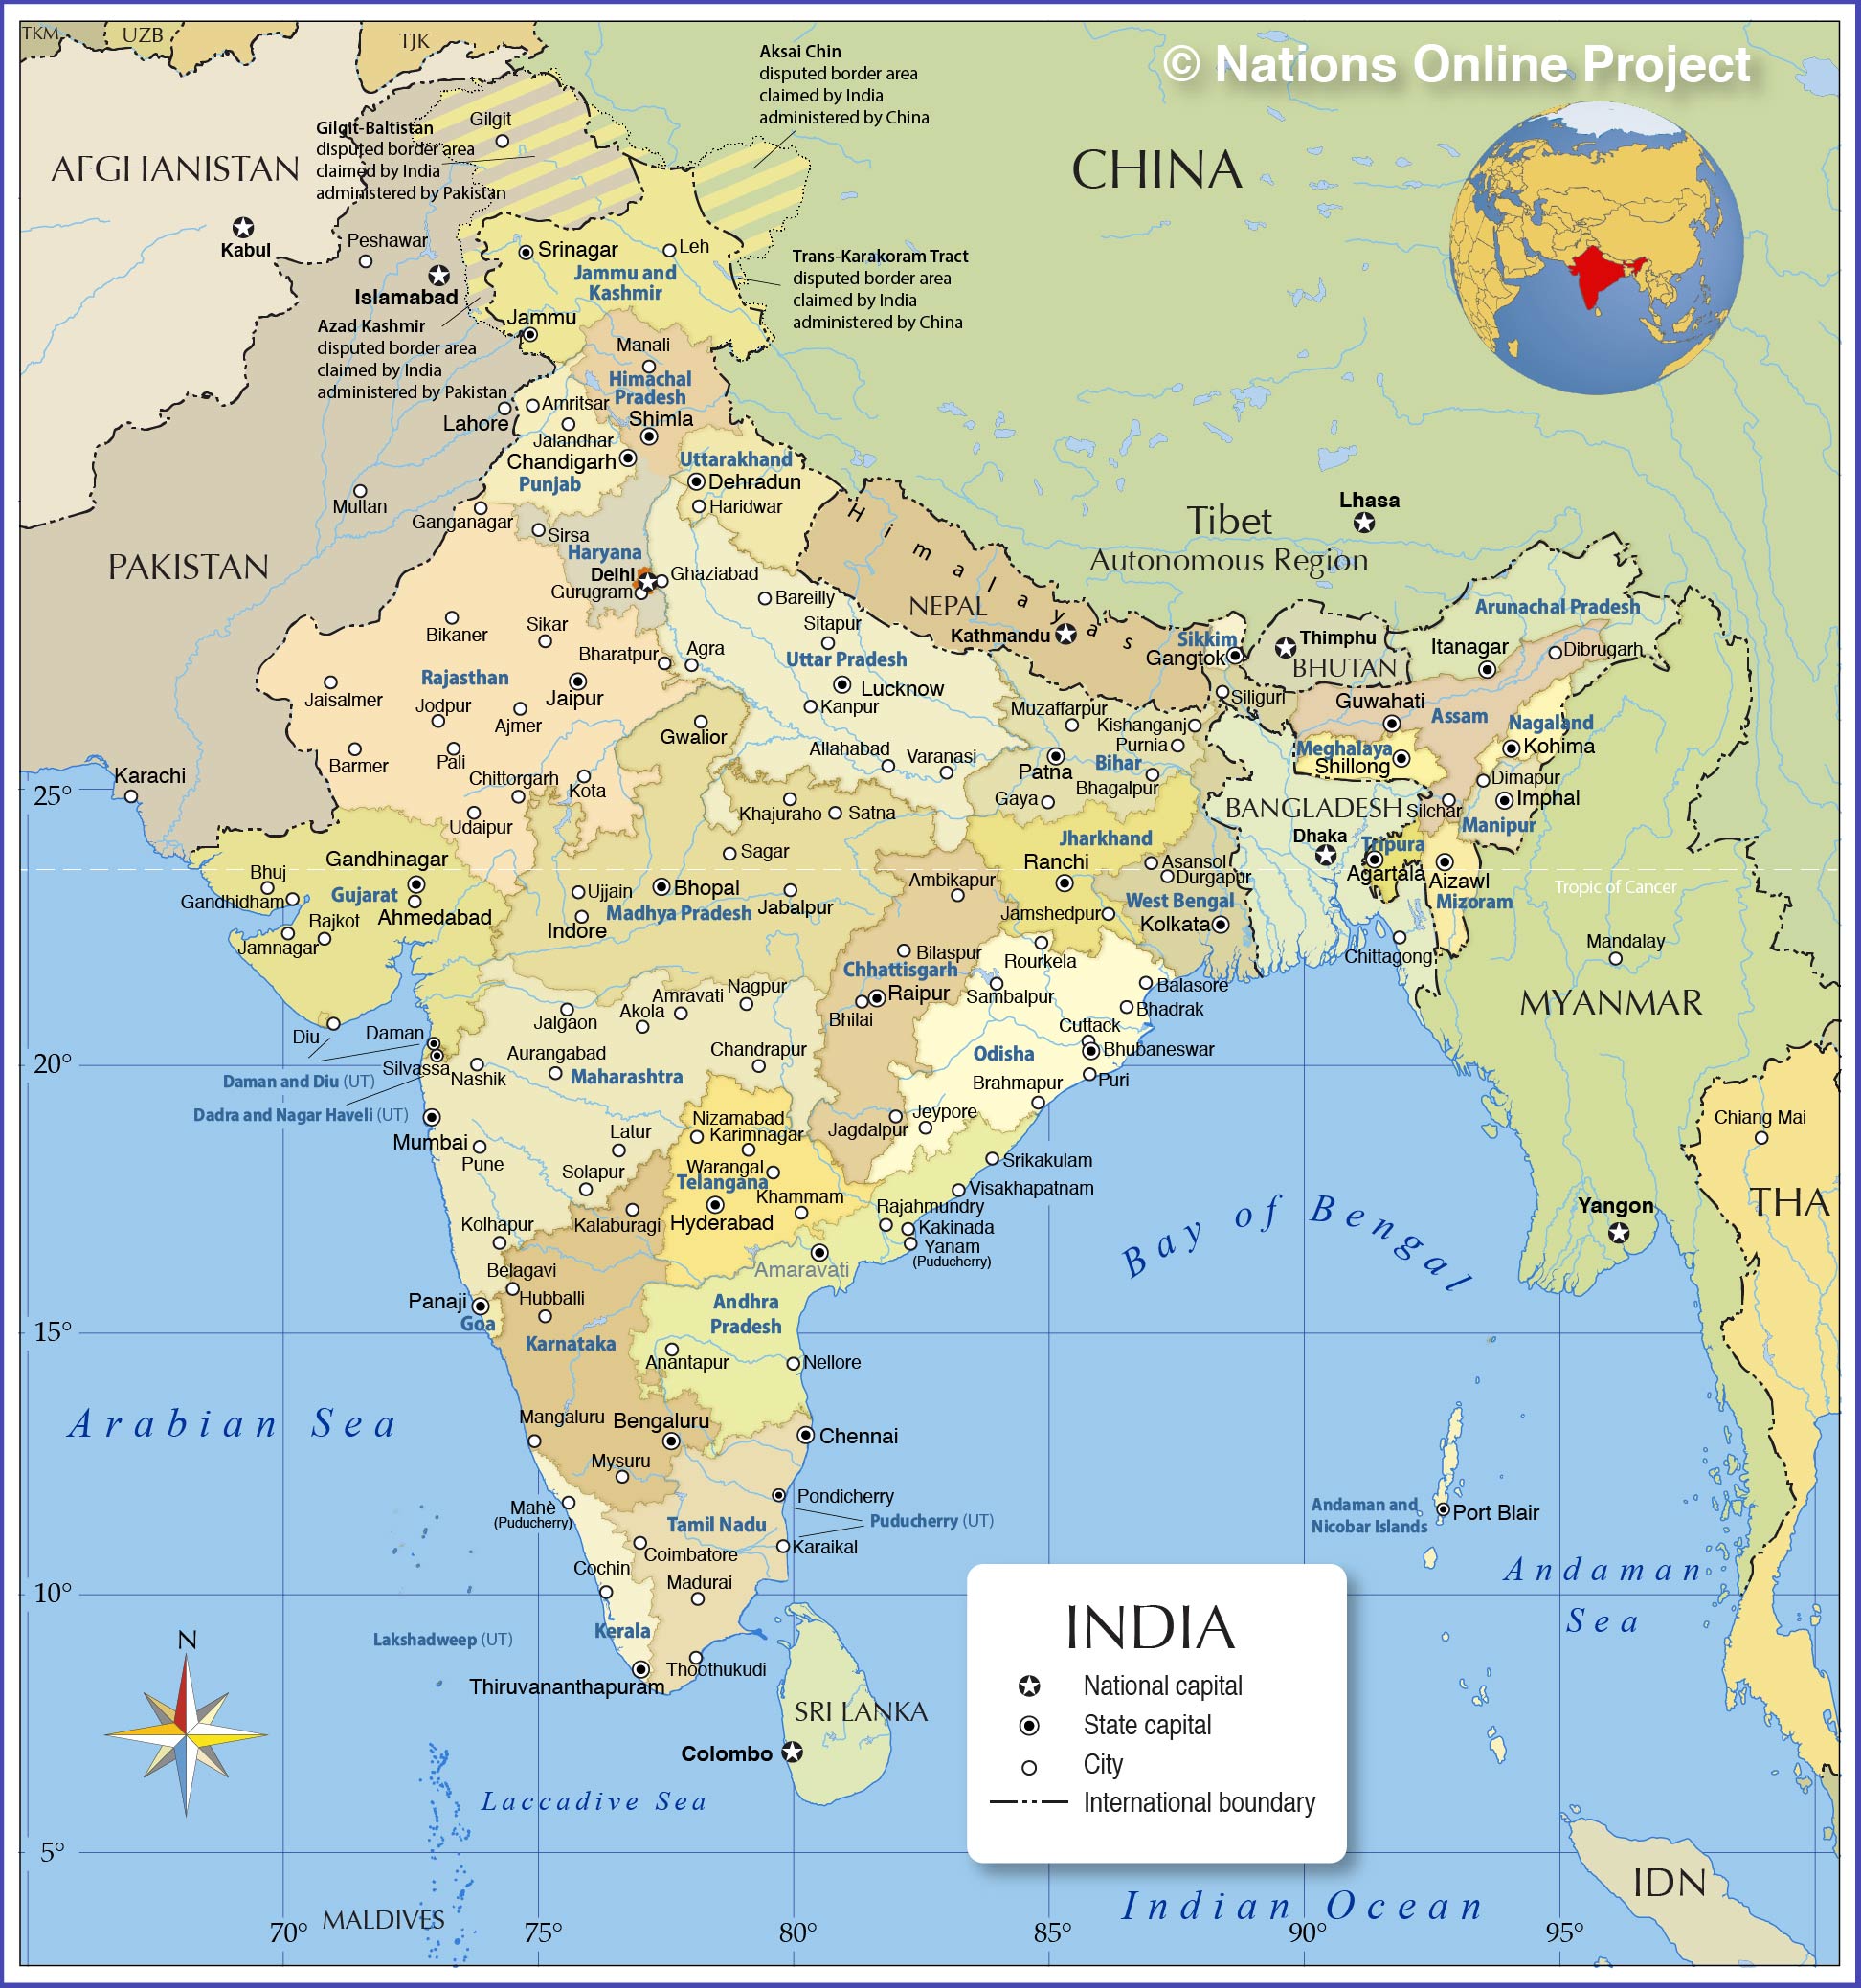 India Maps Coloring Page for Kids - Free Independence Day - India Printable  Coloring Pages Online for Kids - ColoringPages101.com | Coloring Pages for  Kids